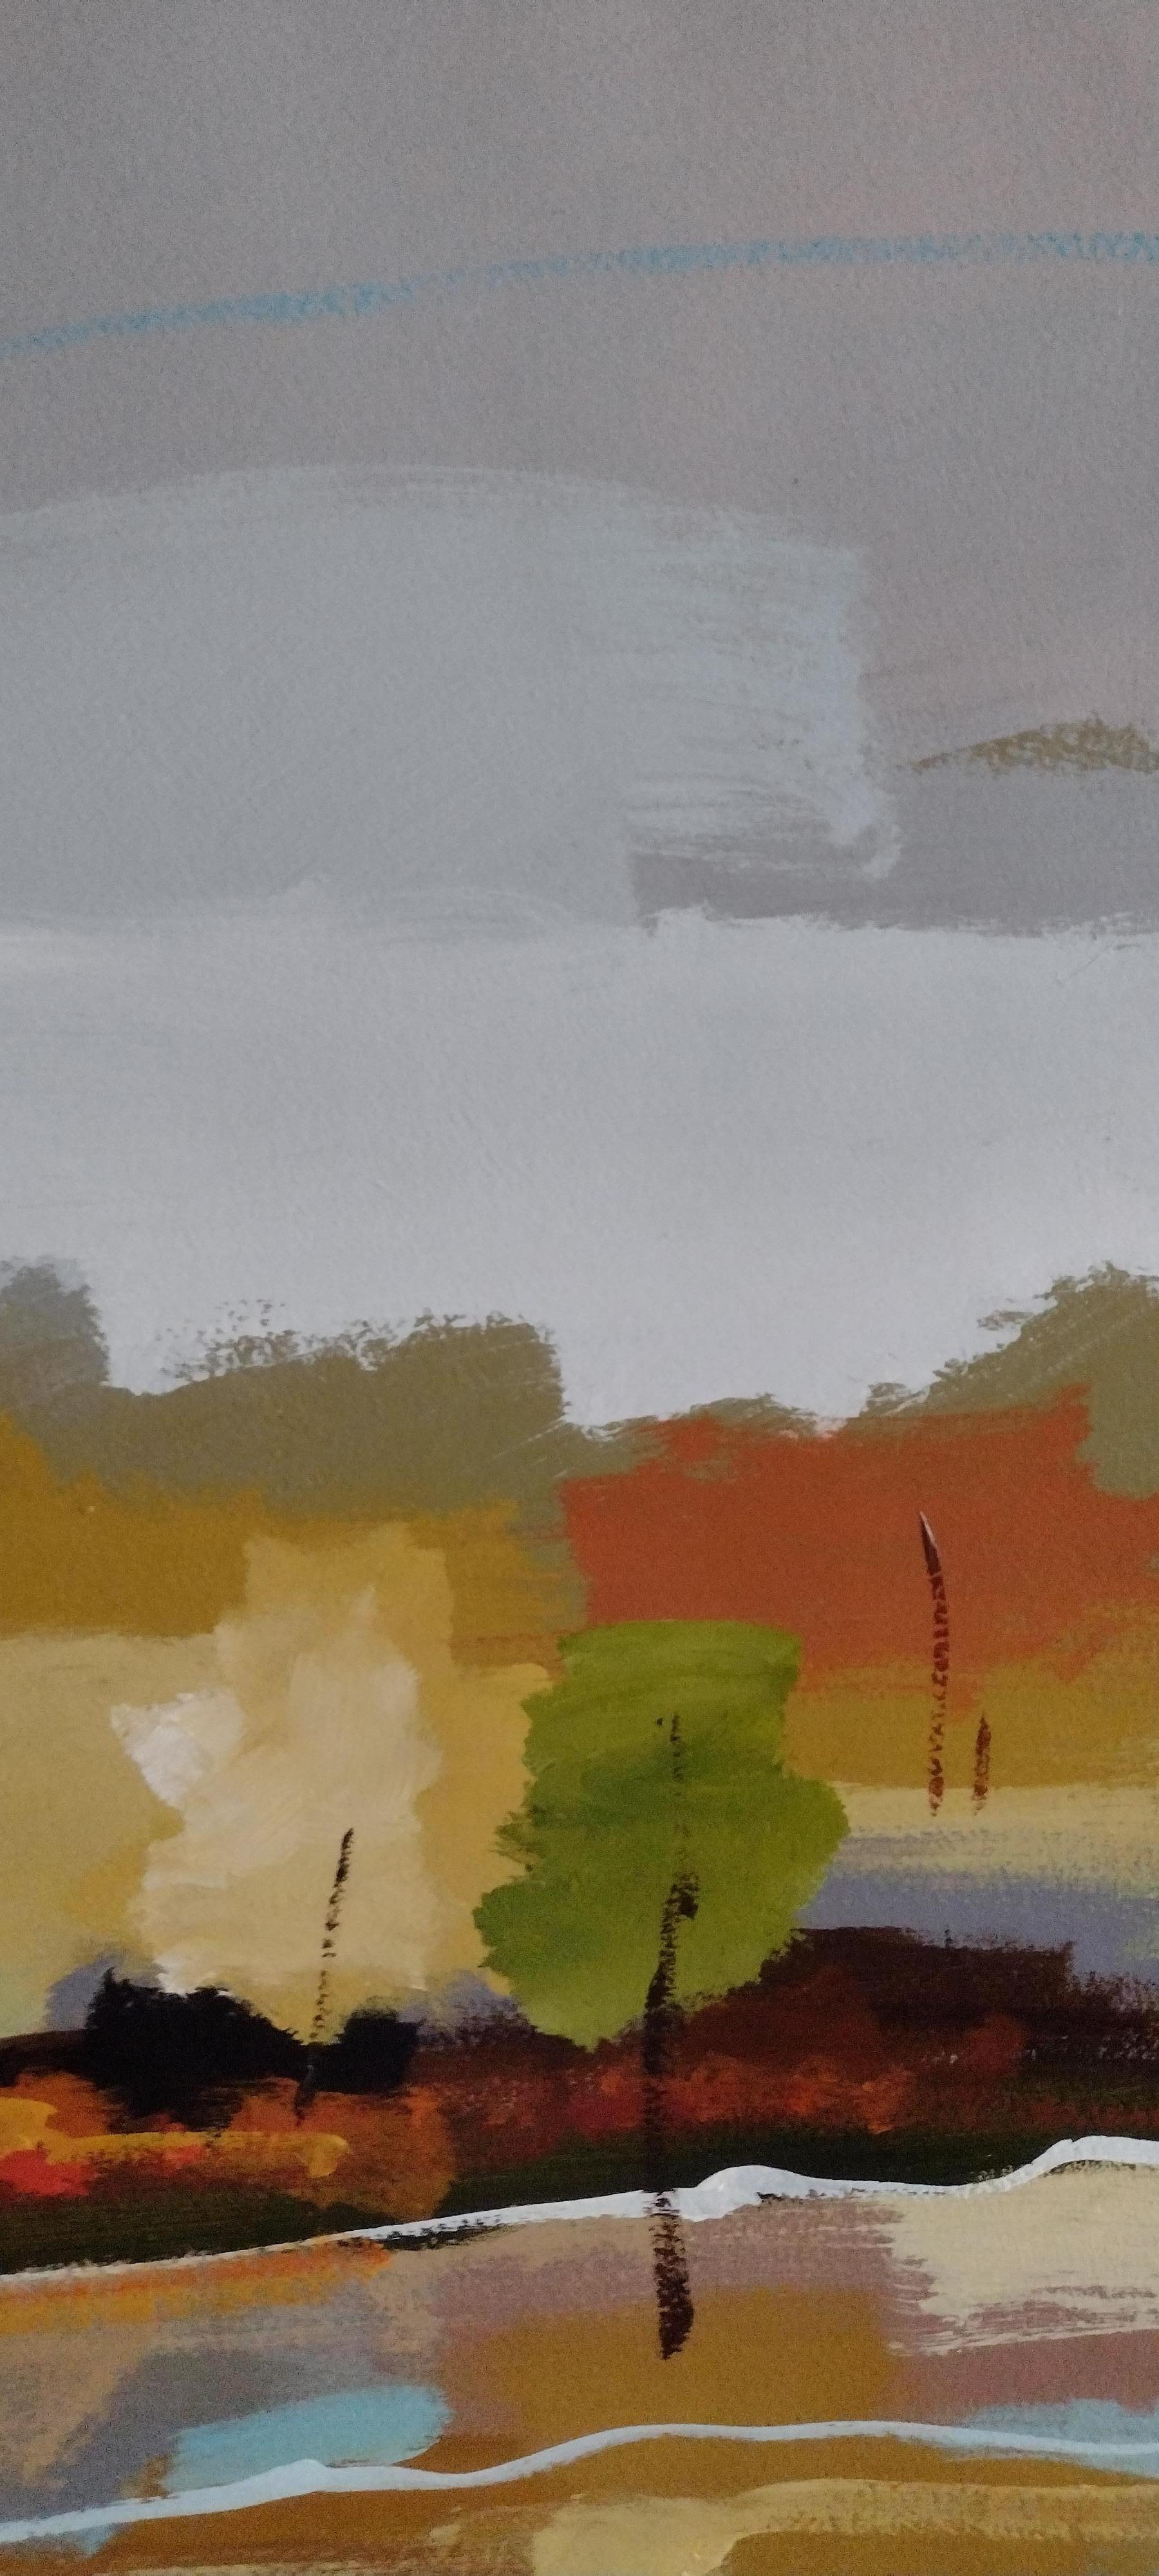 Collective Fondness I - Original Acrylic Landscape on Paper - Painting by Lun Tse 